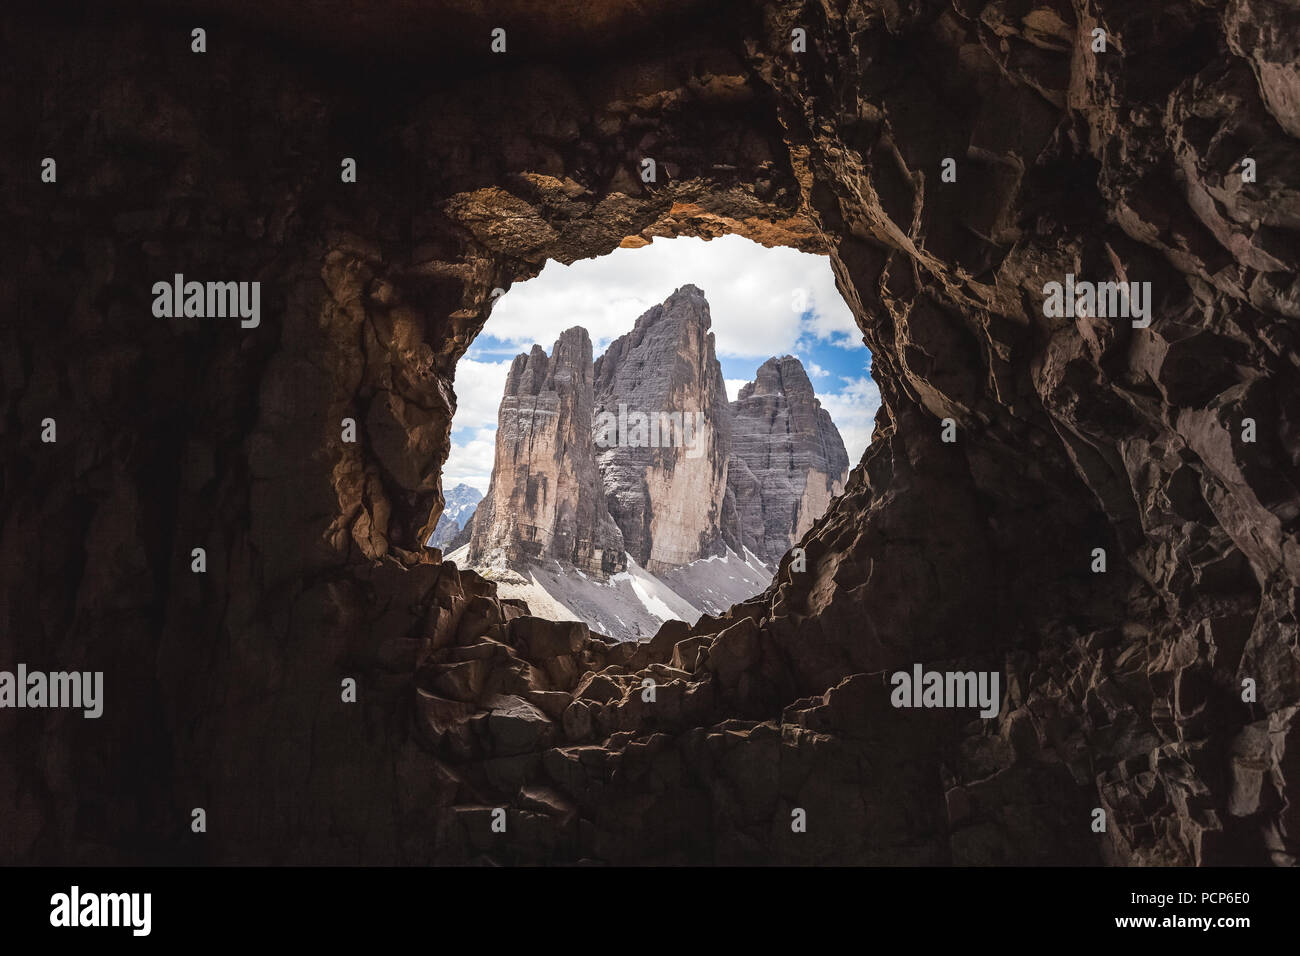 Tre Cime di Lavaredo Peaks from a cave post in the First World War, Dolomites, Italy, Mount Paterno, Dolomites, Italy Stock Photo